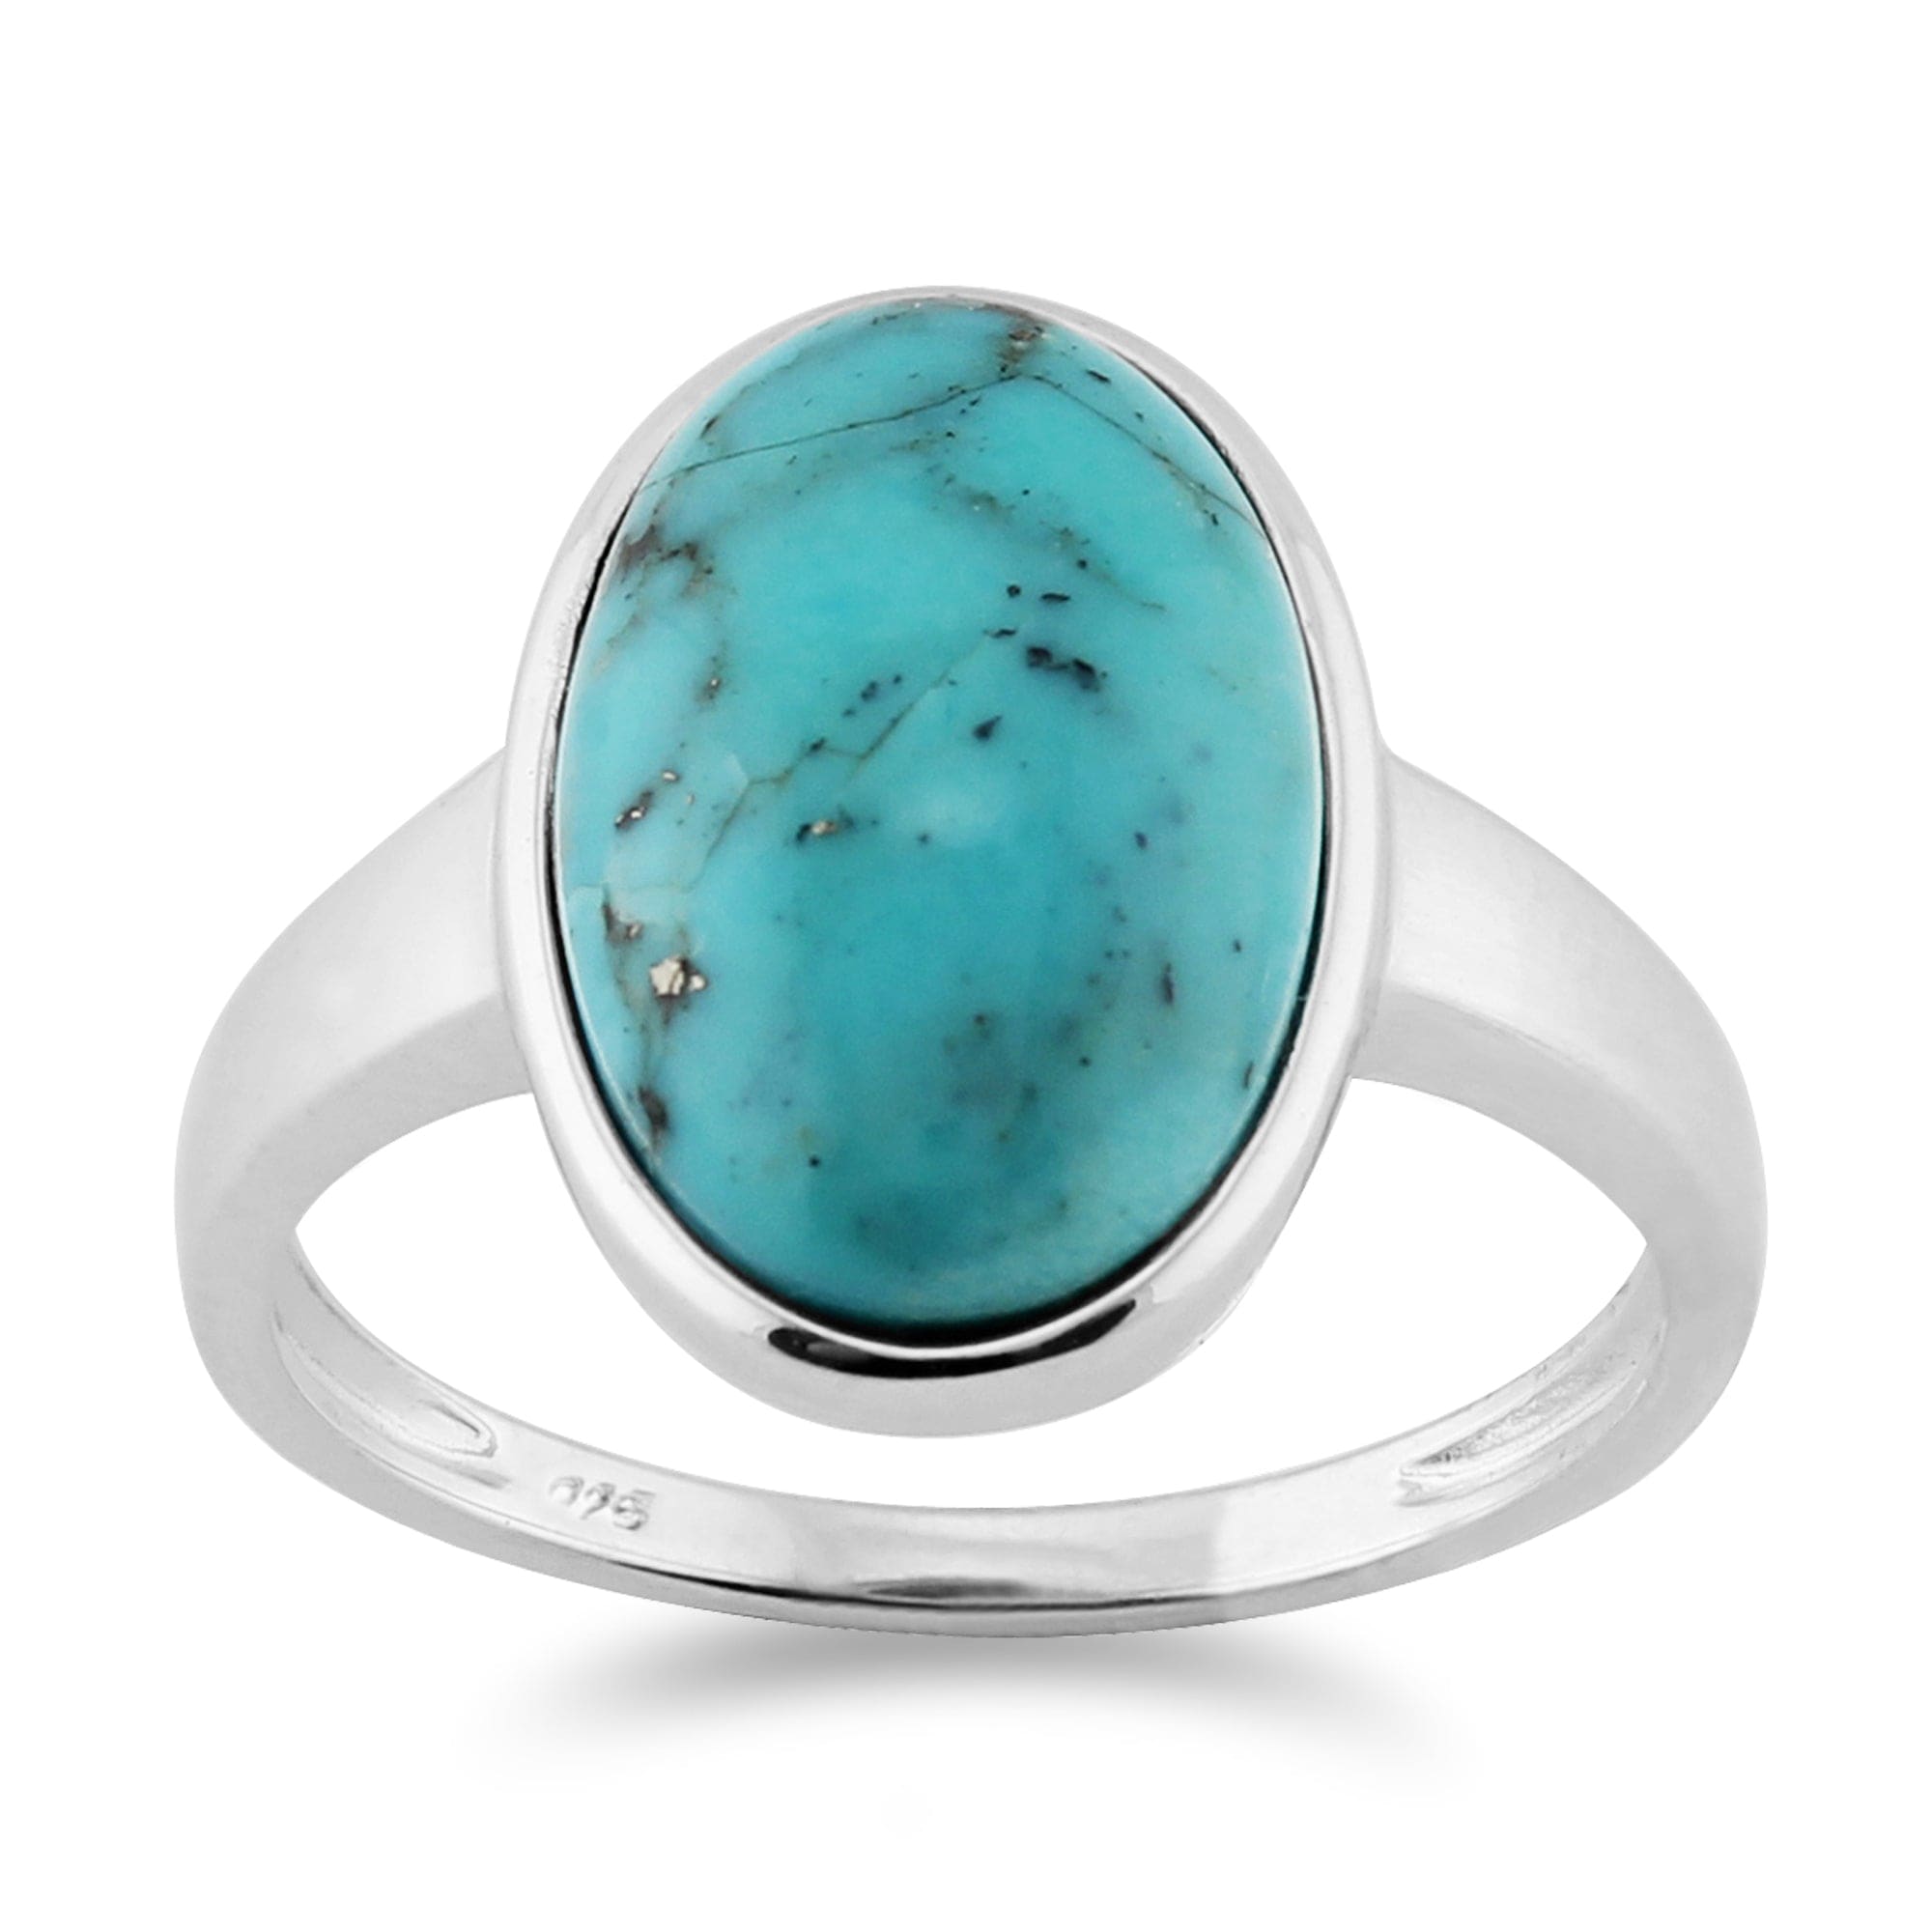 Classic Oval Turquoise Cabochon Bezel Set Cocktail Ring in 925 Sterling Silver - Gemondo